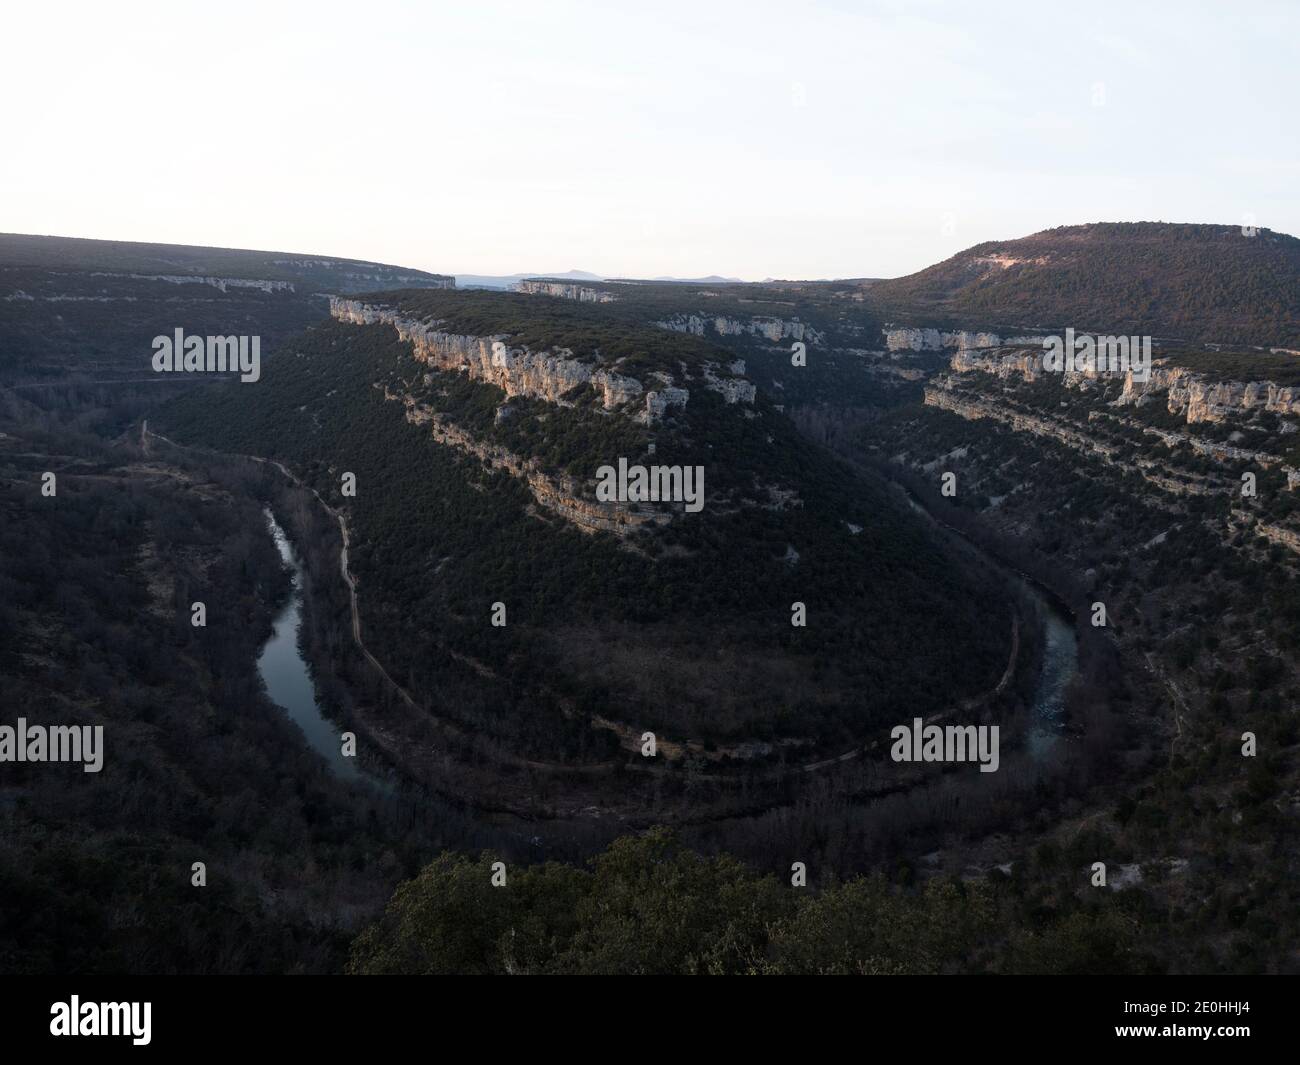 Aerial panorama of horsehoe bend canyon Canion Canon del Ebro river valley between Valdelateja and Cortiguera Burgos Province Castile and Leon Spain Stock Photo